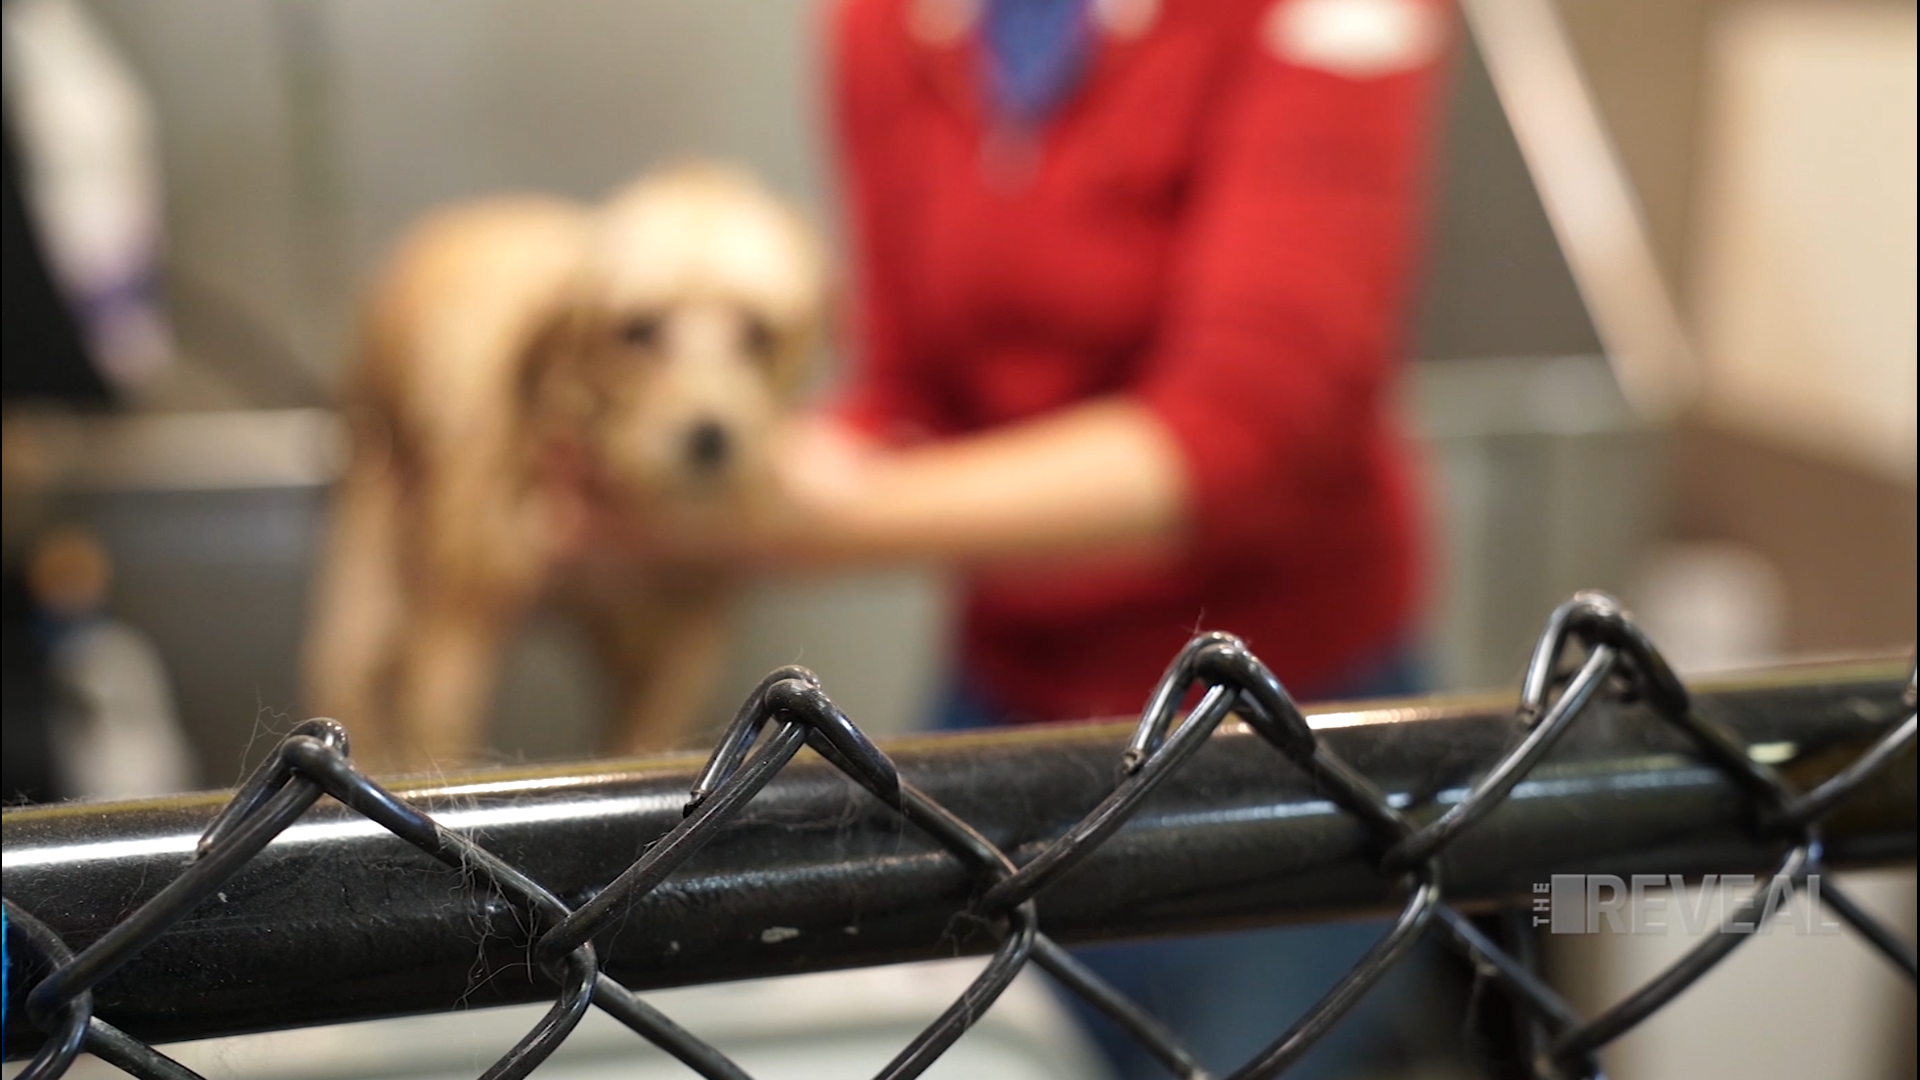 There have been 47 pet deaths connected to PetSmart over the past decade, and 32 of the animals died since 2015. Owners say they took their dogs in for a nail clipping or haircut and they died from rough handling or intense stress. Some dogs were allegedly placed in drying cages, unable to escape as air pushed in.